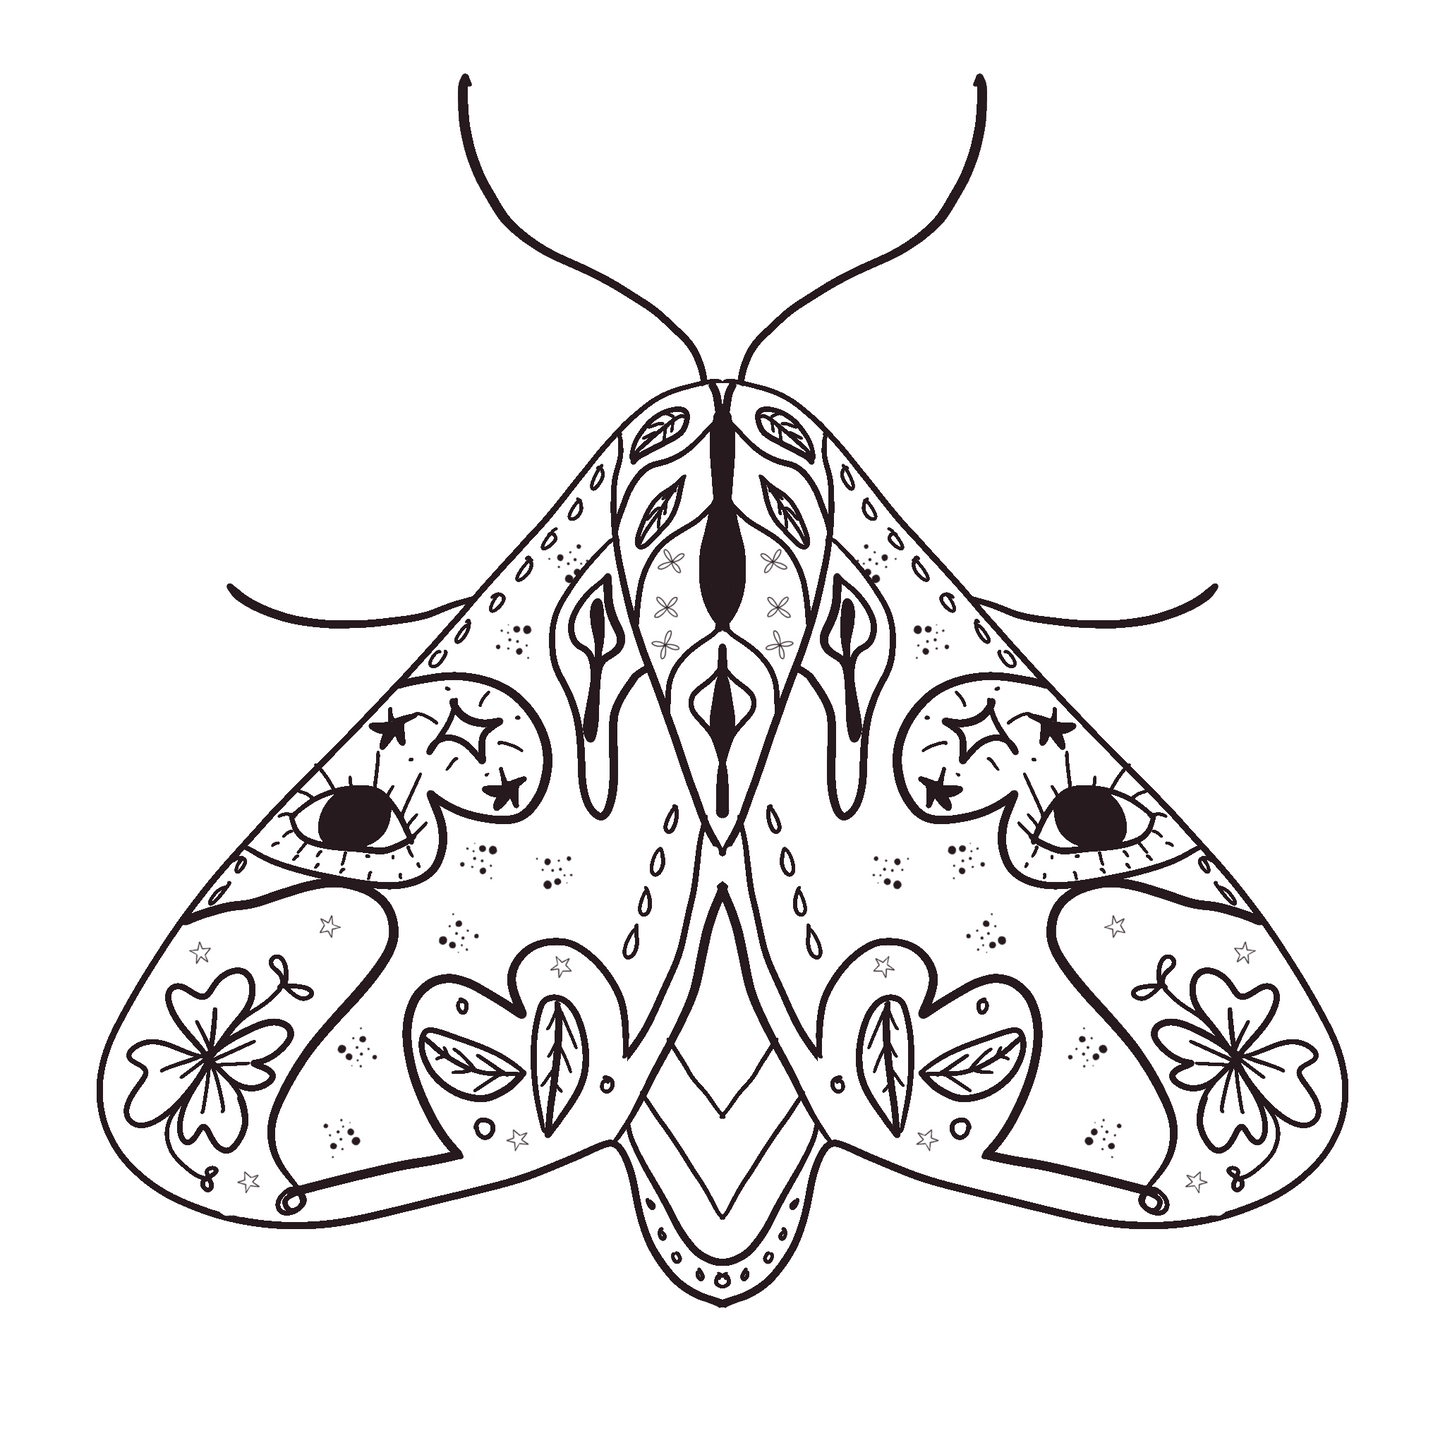 Colour Me in Folk Moth - Free Download